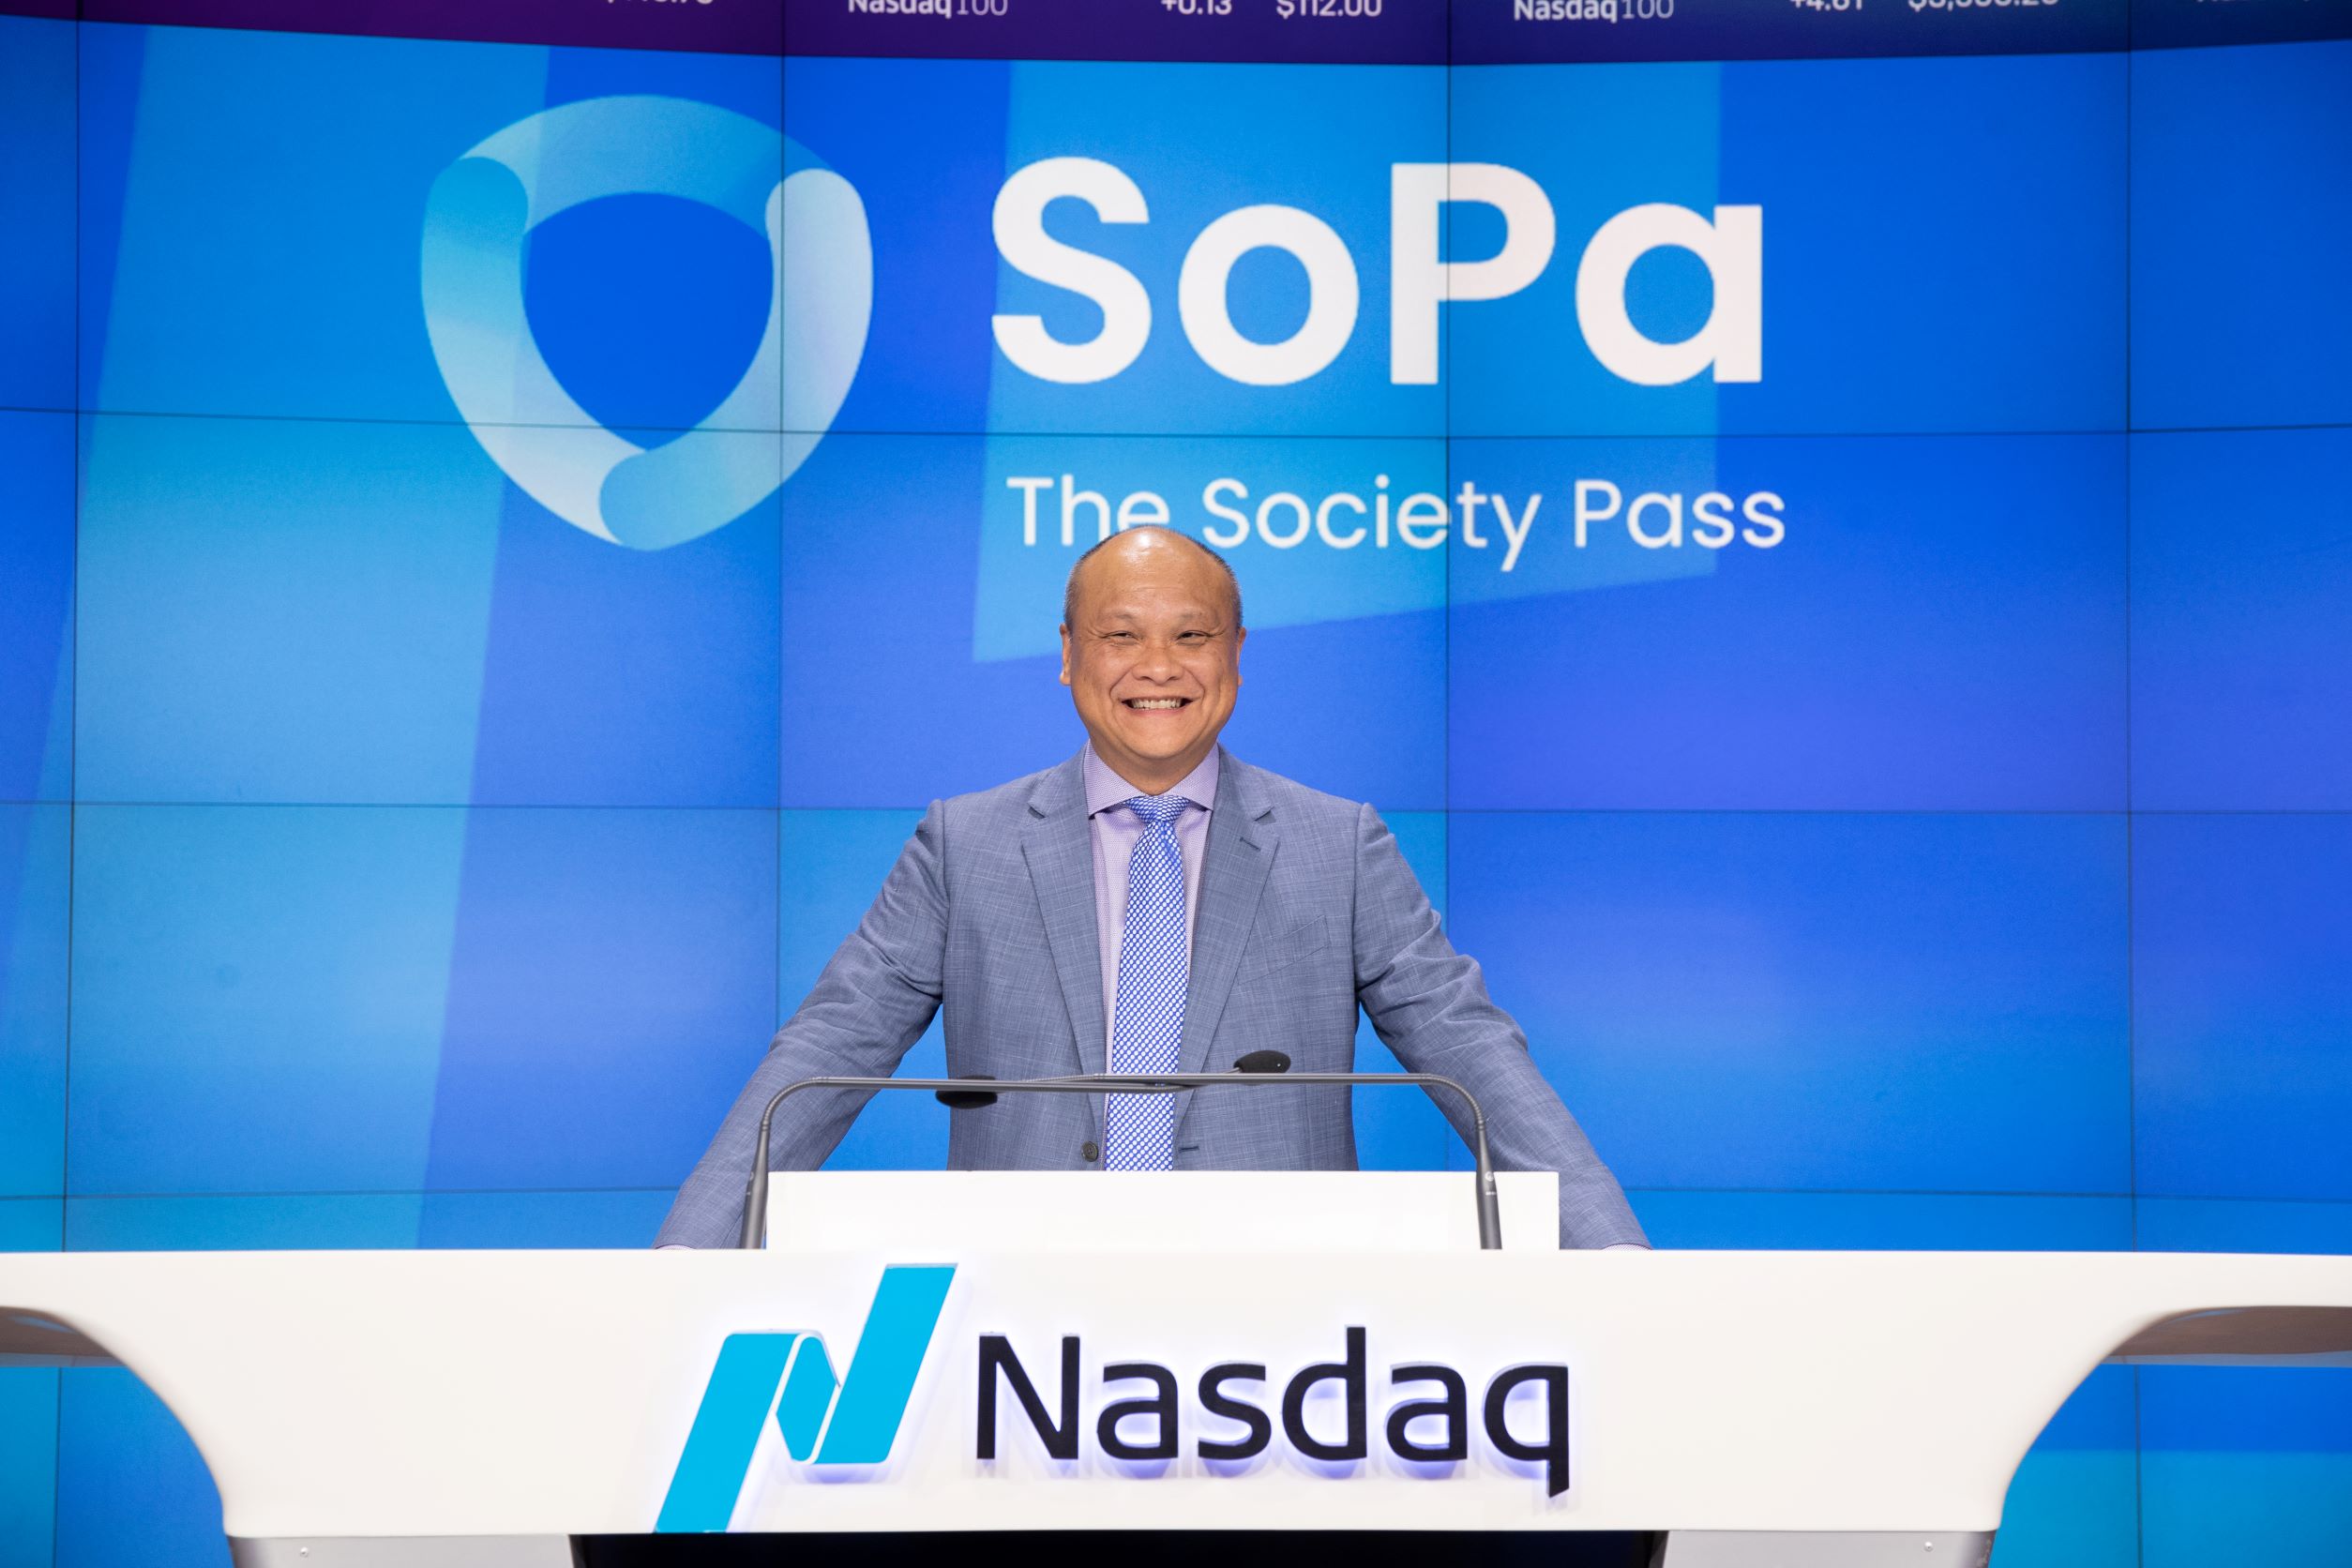 Dennis Nguyen - Founder, Chairman and Chief Executive Officer at Society Pass (SoPa)